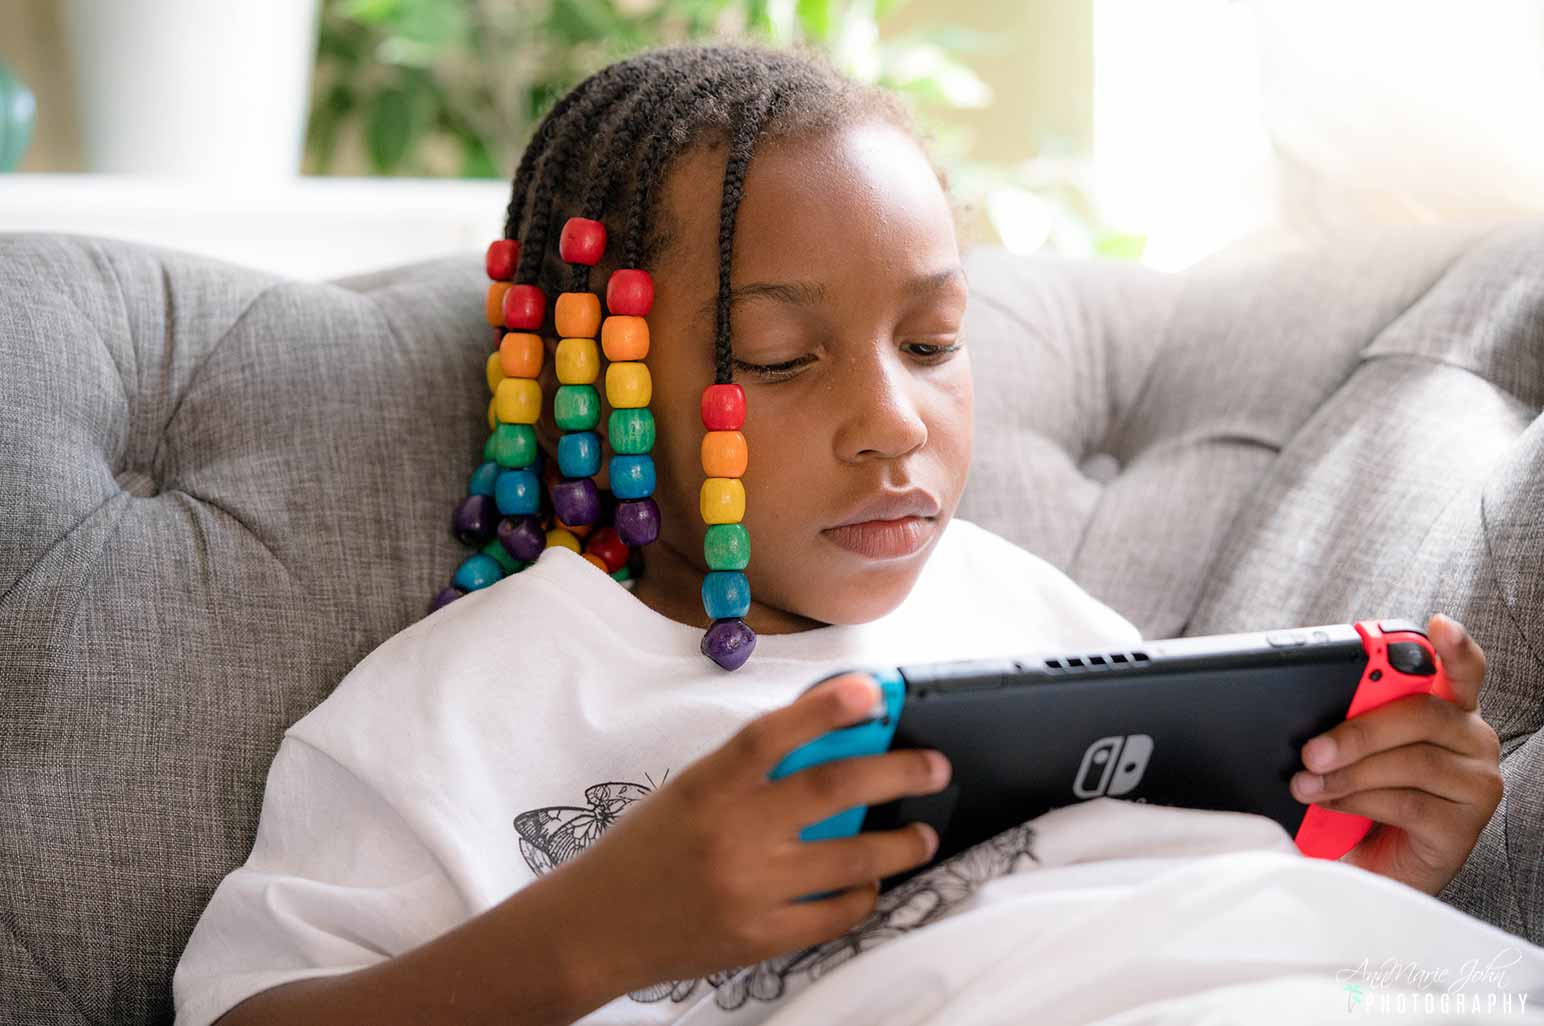 Child Playing Video Games